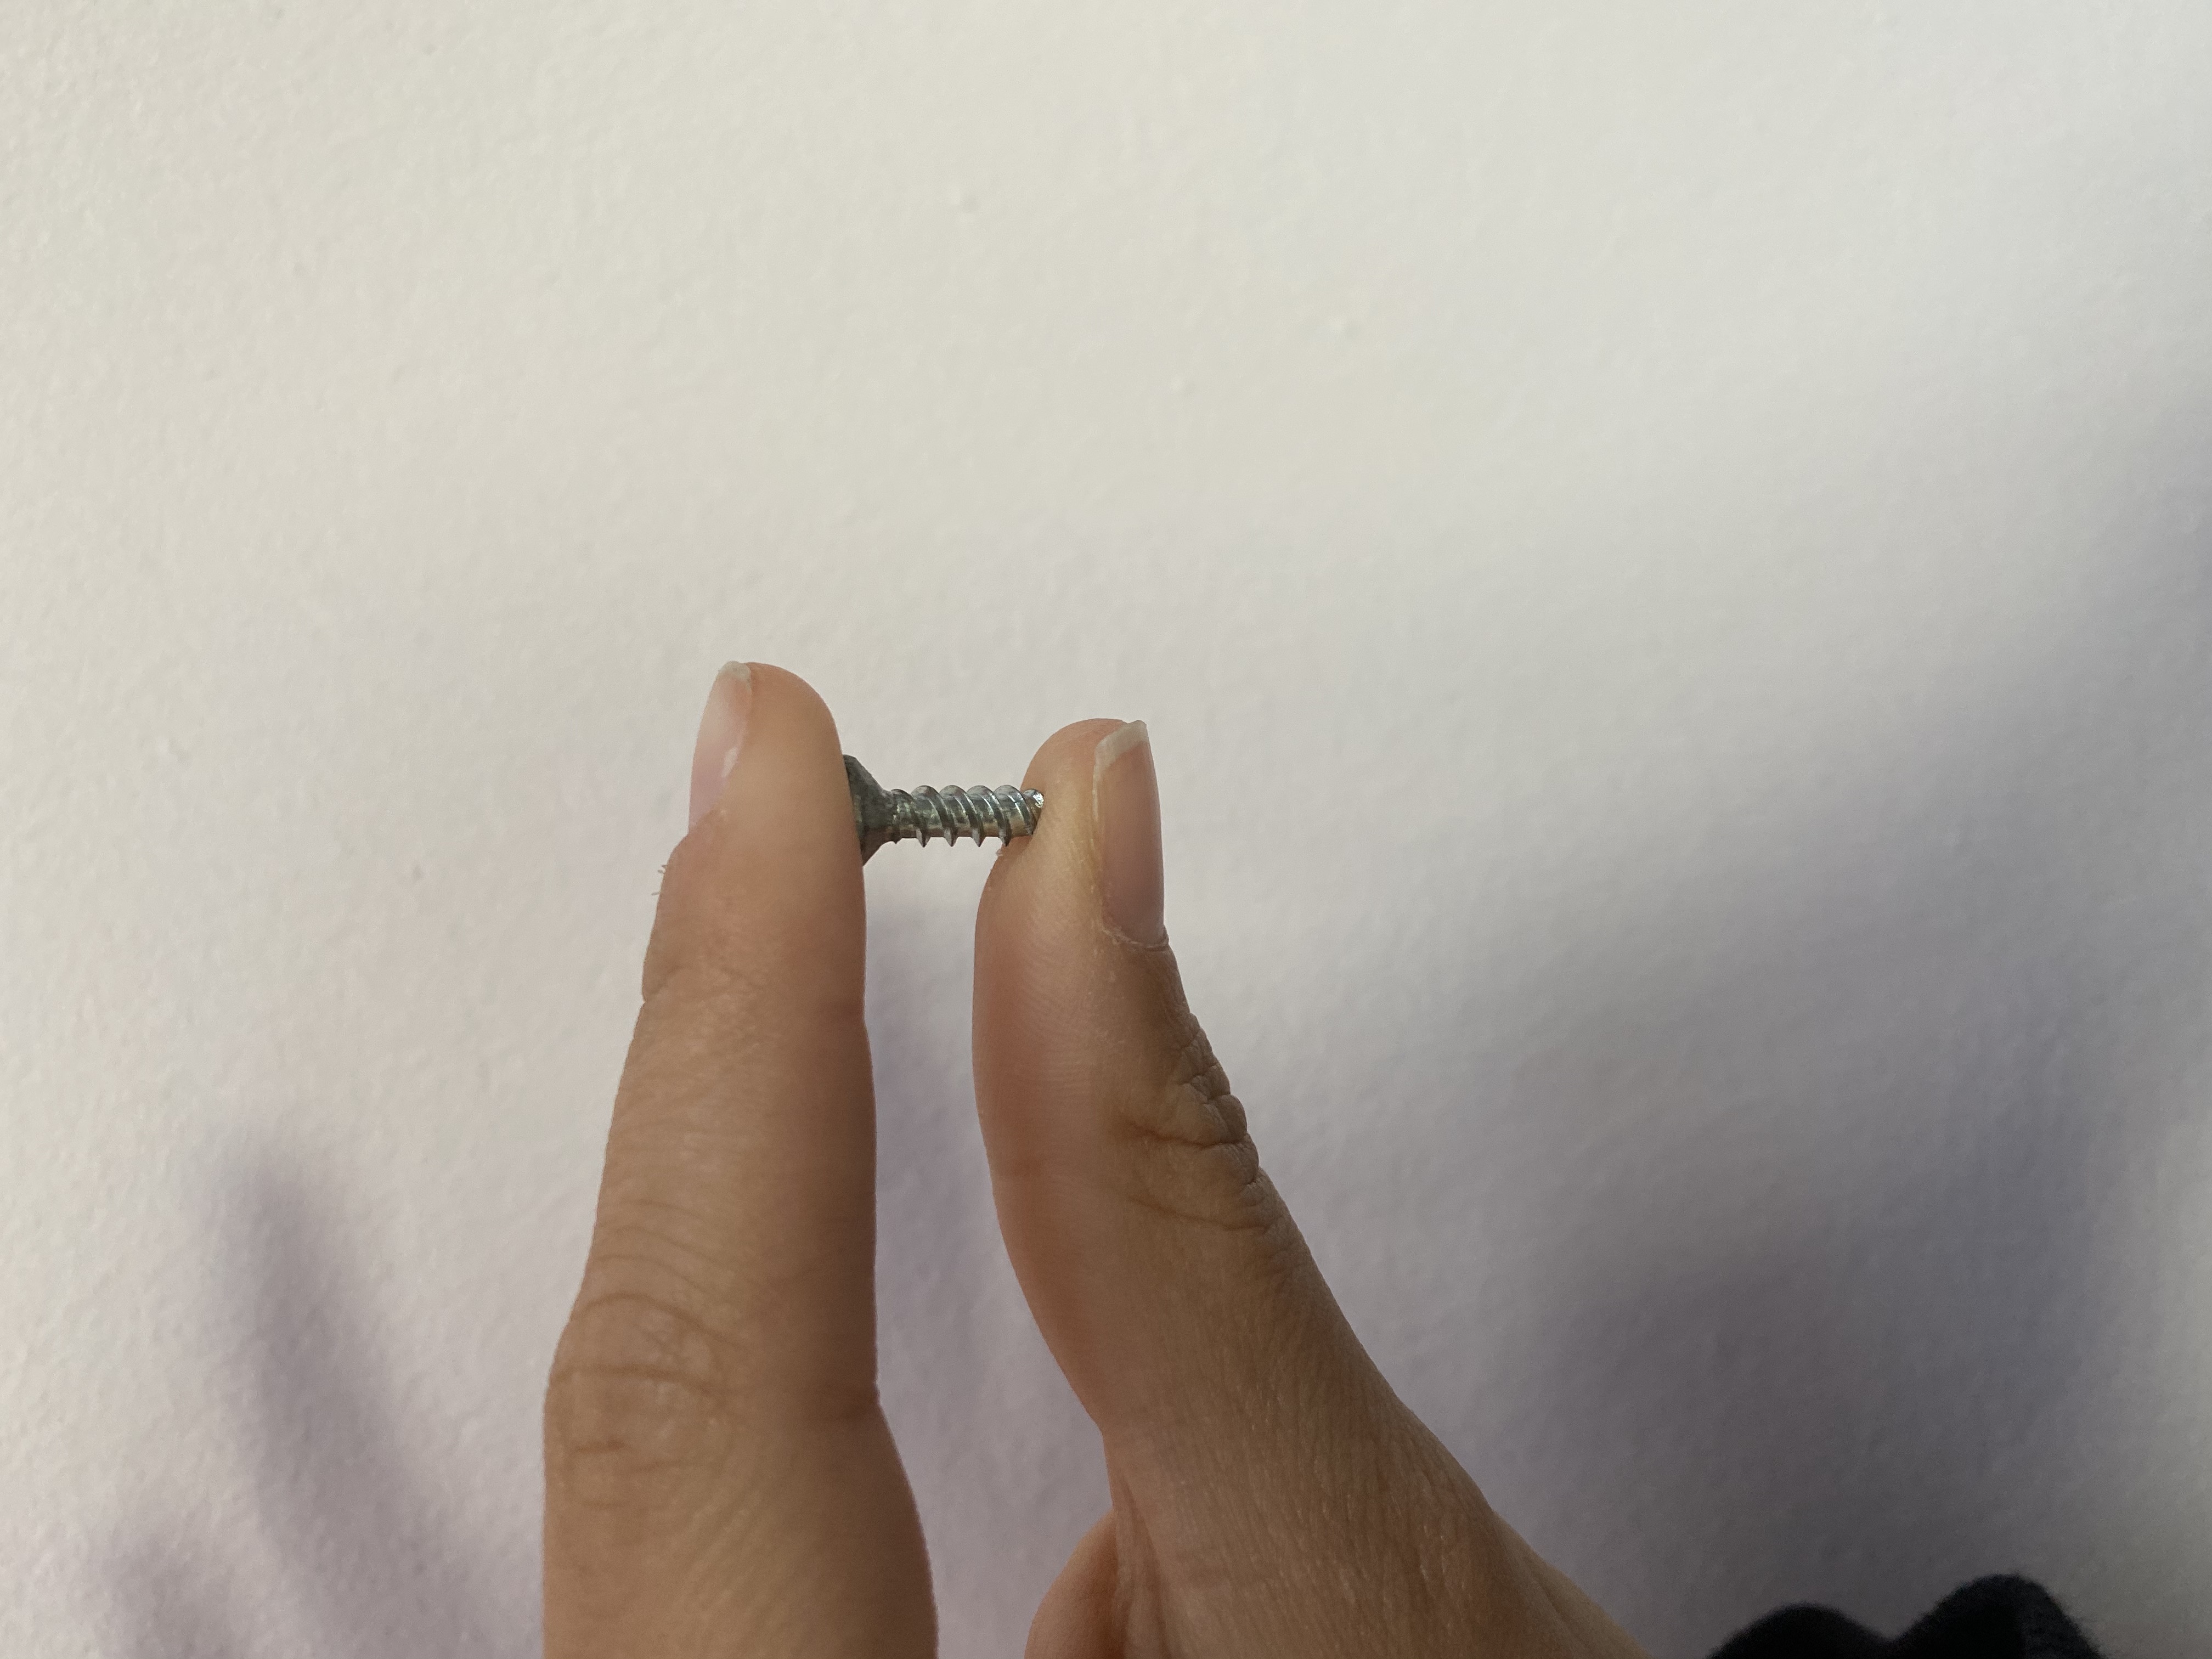 this is not a screw, this is a bee attraction device